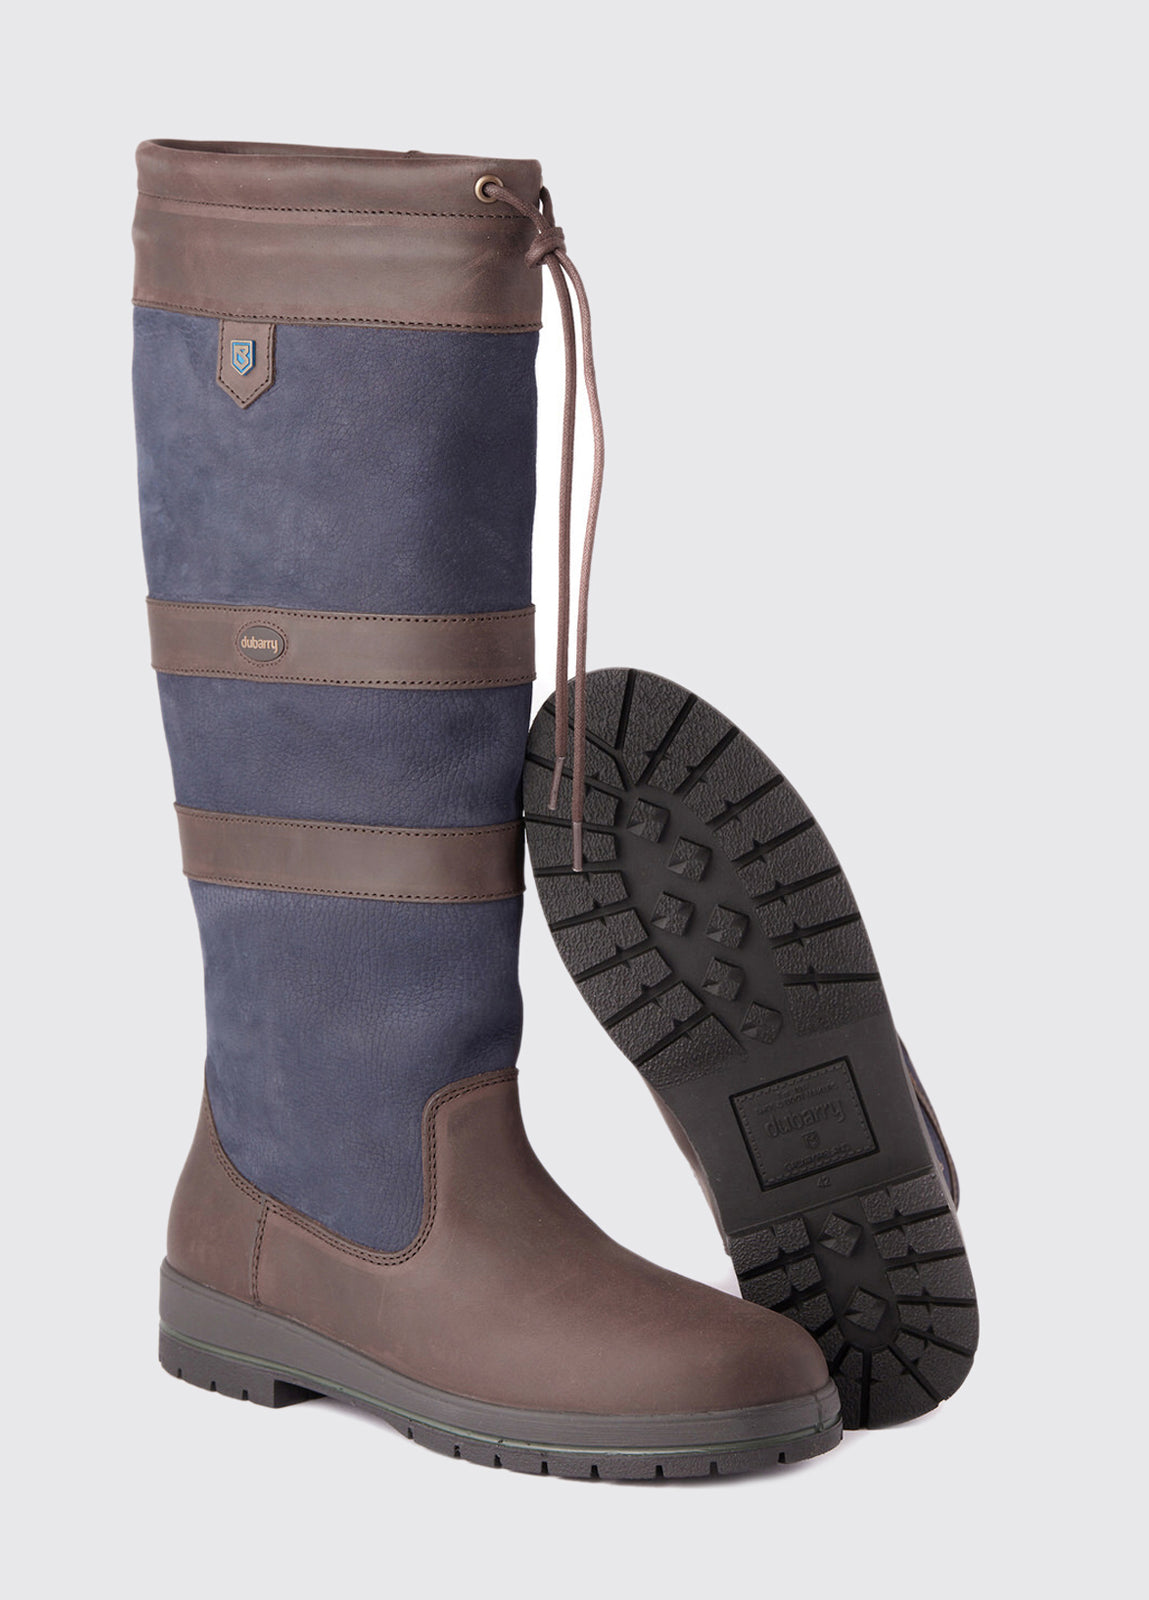 Dubarry Galway Country Boot in Navy/Brown